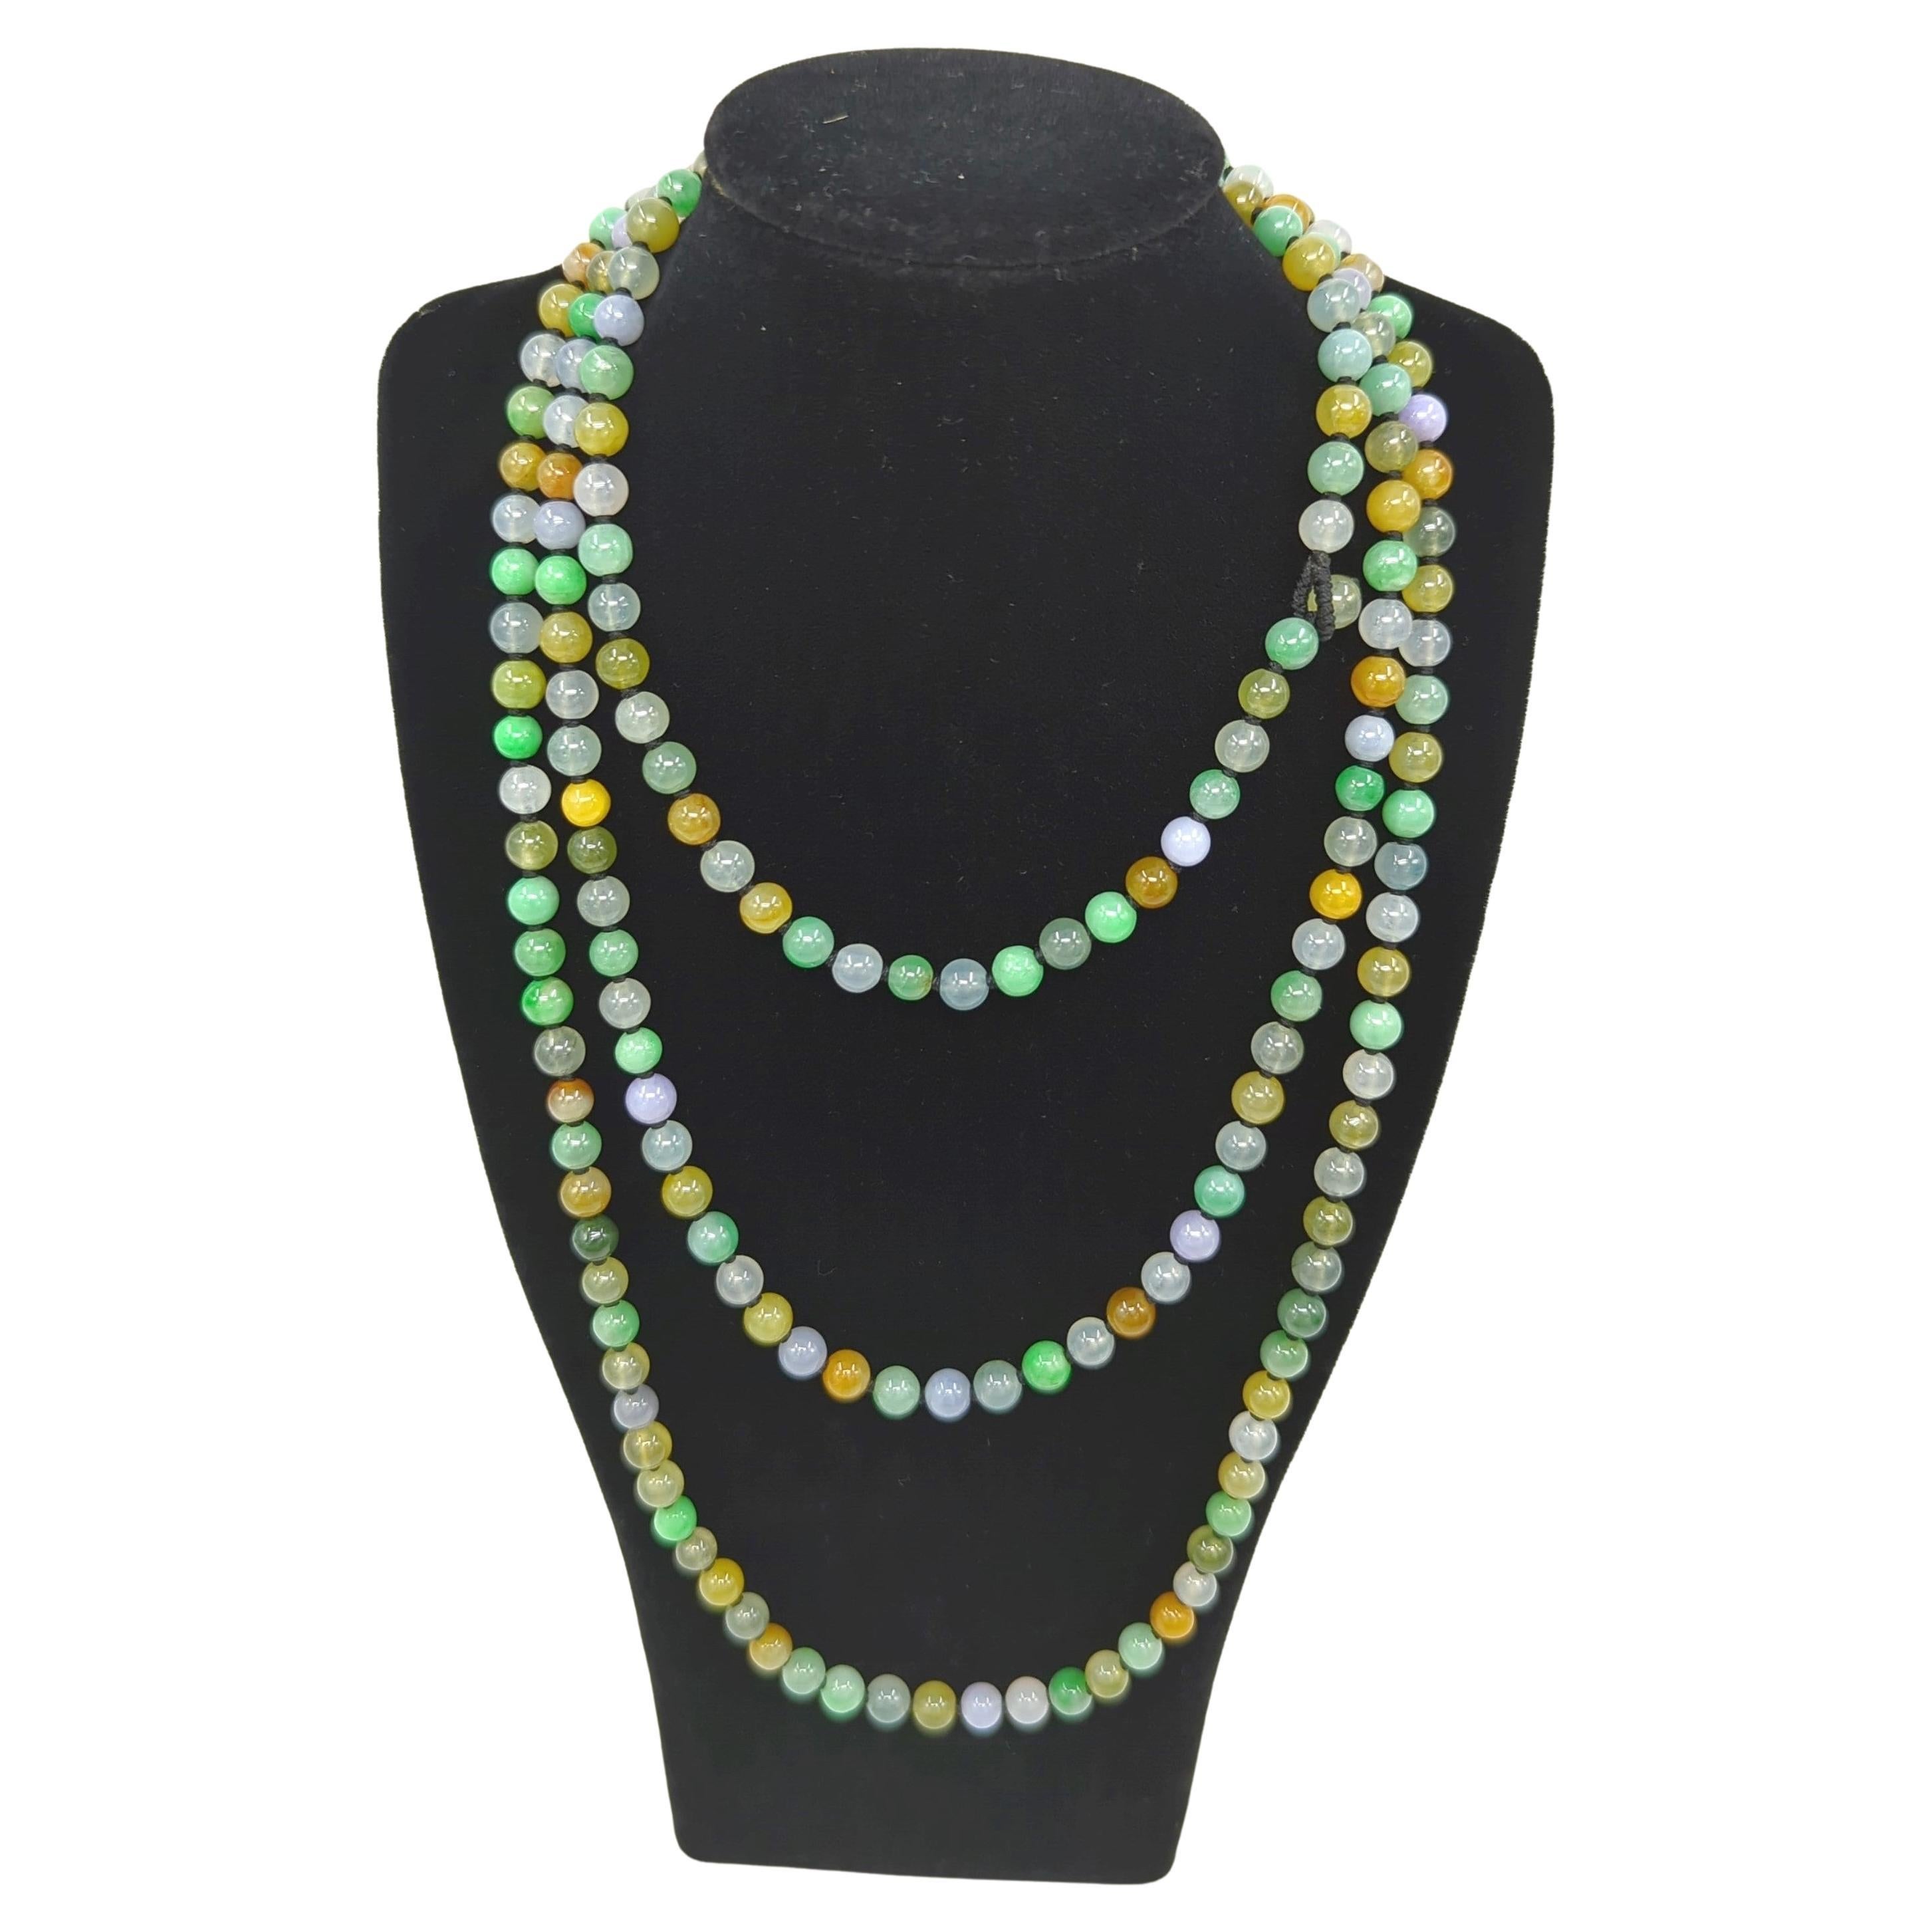 Women's Exquisite Multicolor Icy Jadeite A-Grade 200 Beads Necklace Very Long Strand 52